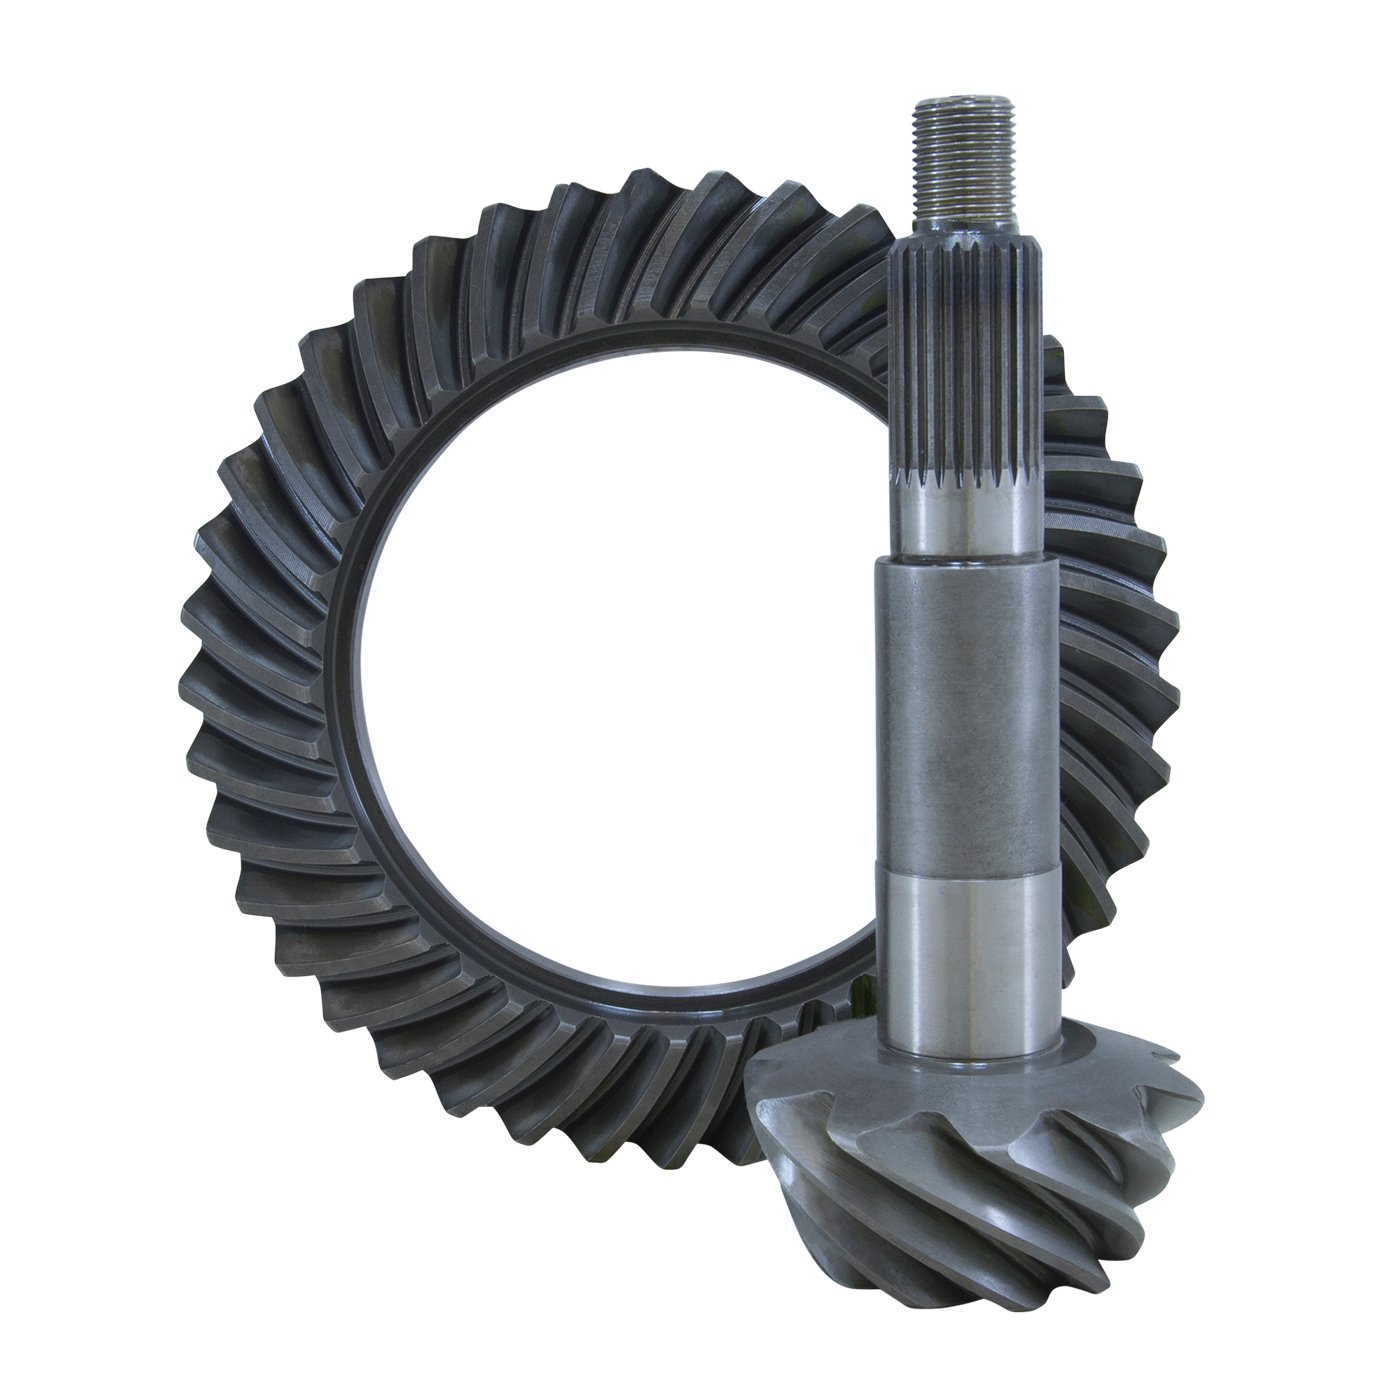 USA Standard ZG D44-456T Replacement Ring & Pinion